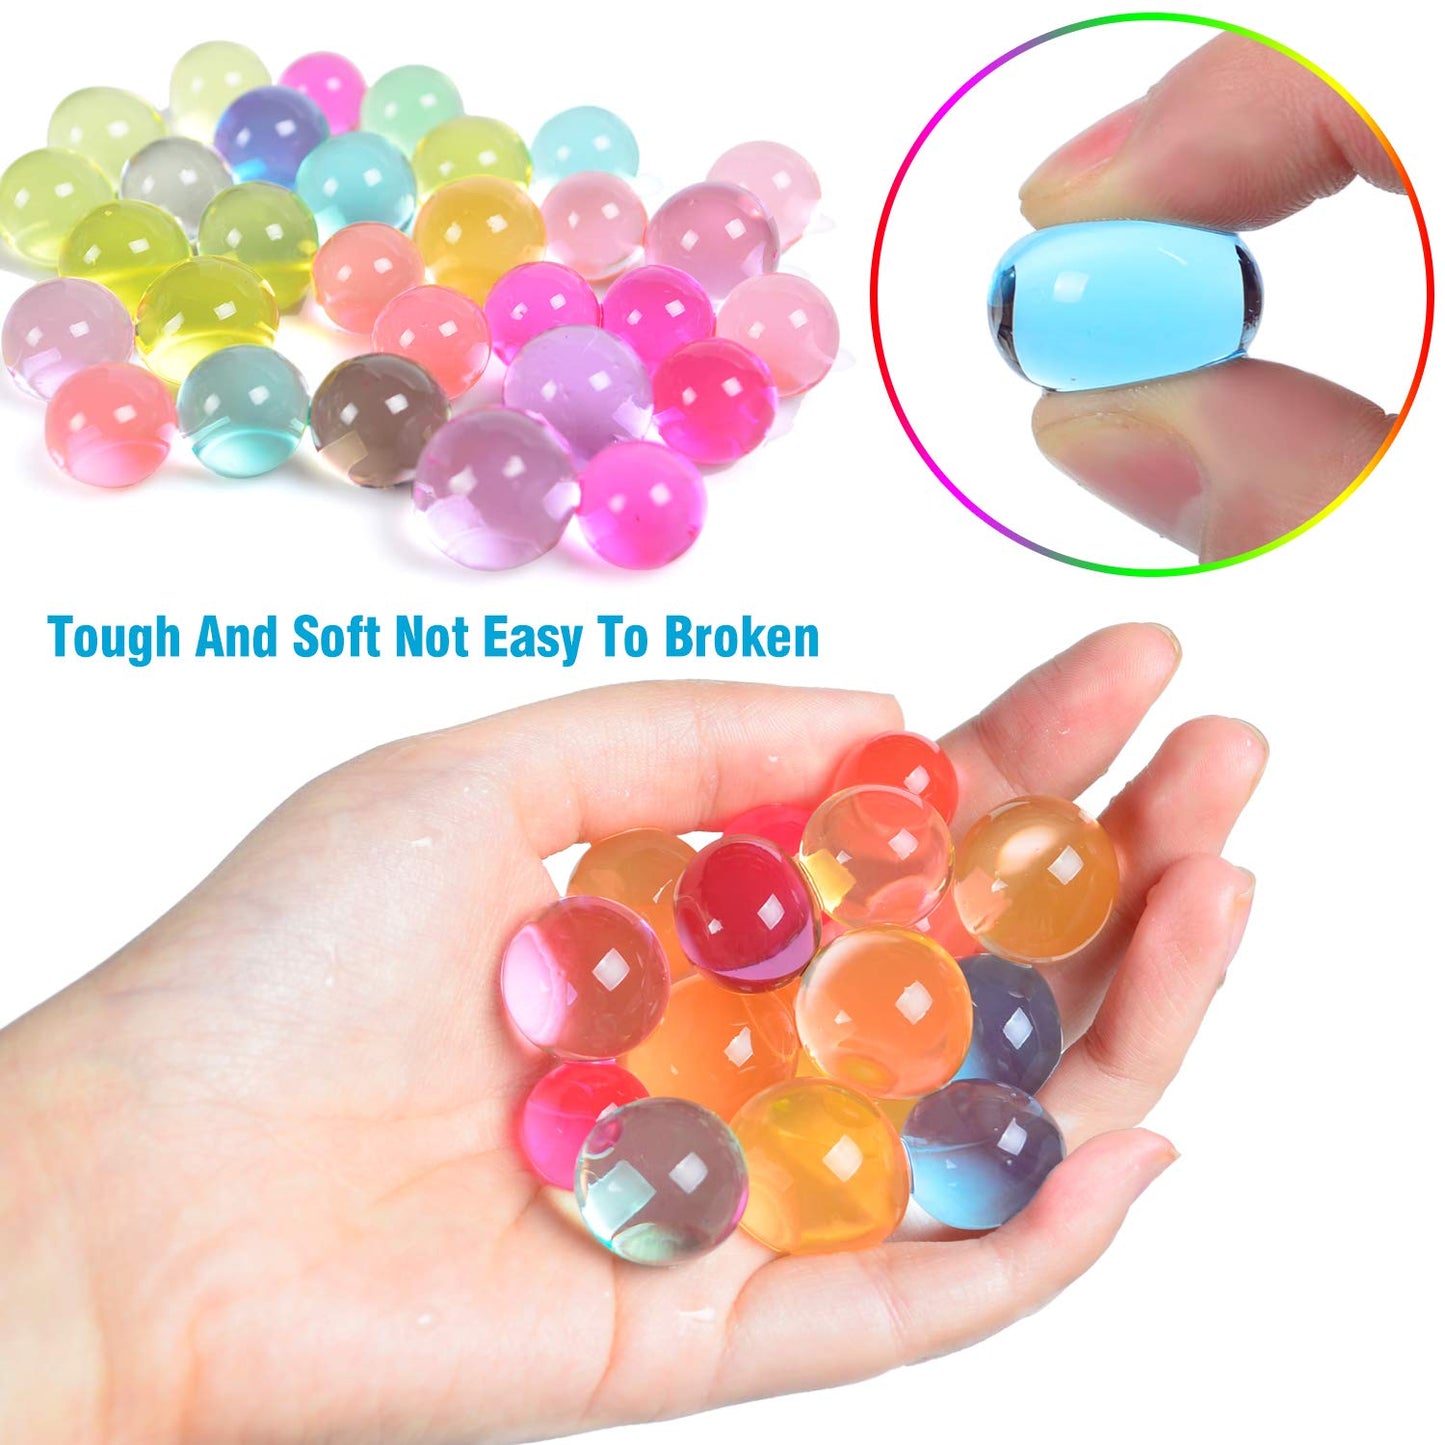 100,000 Water Beads Non-Toxic Rainbow Mix, Sensory Toy Water Gel Bead Water Jelly Pearls for Spa Refill, Kids Sensory Play, Vases, Plant, Wedding and Home Decor